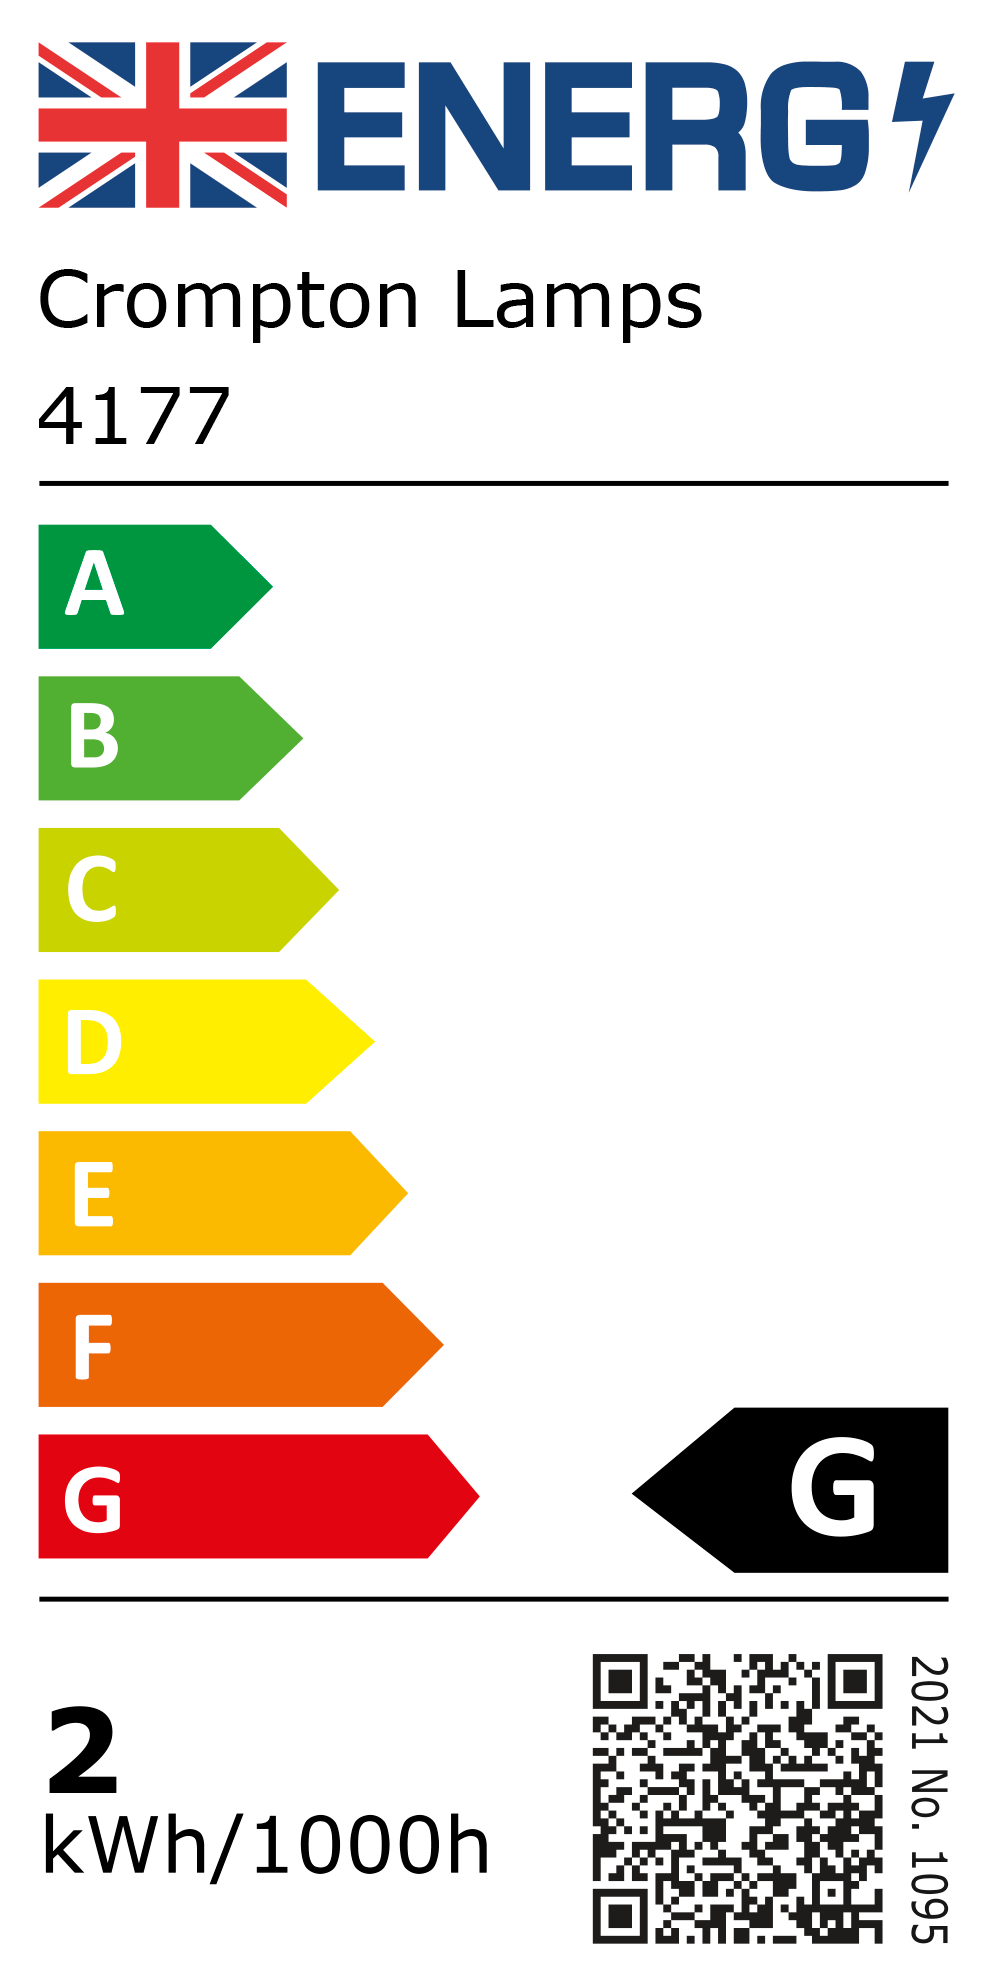 New 2021 Energy Rating Label: Stock Code 4177